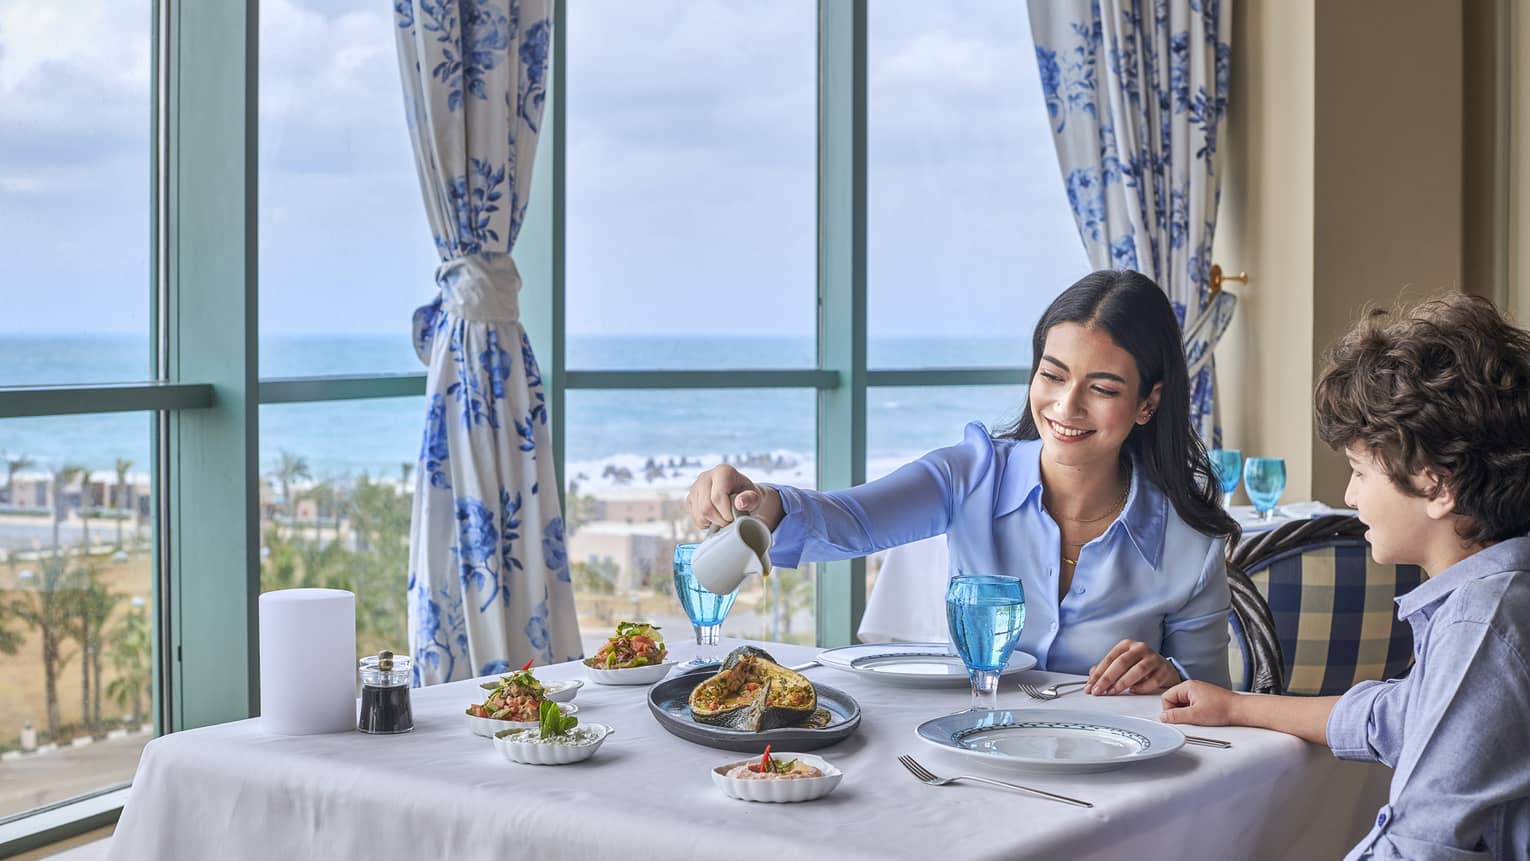 Mother and son enjoy fine dining at Kala Restaurant with views of the Mediterranean Sea